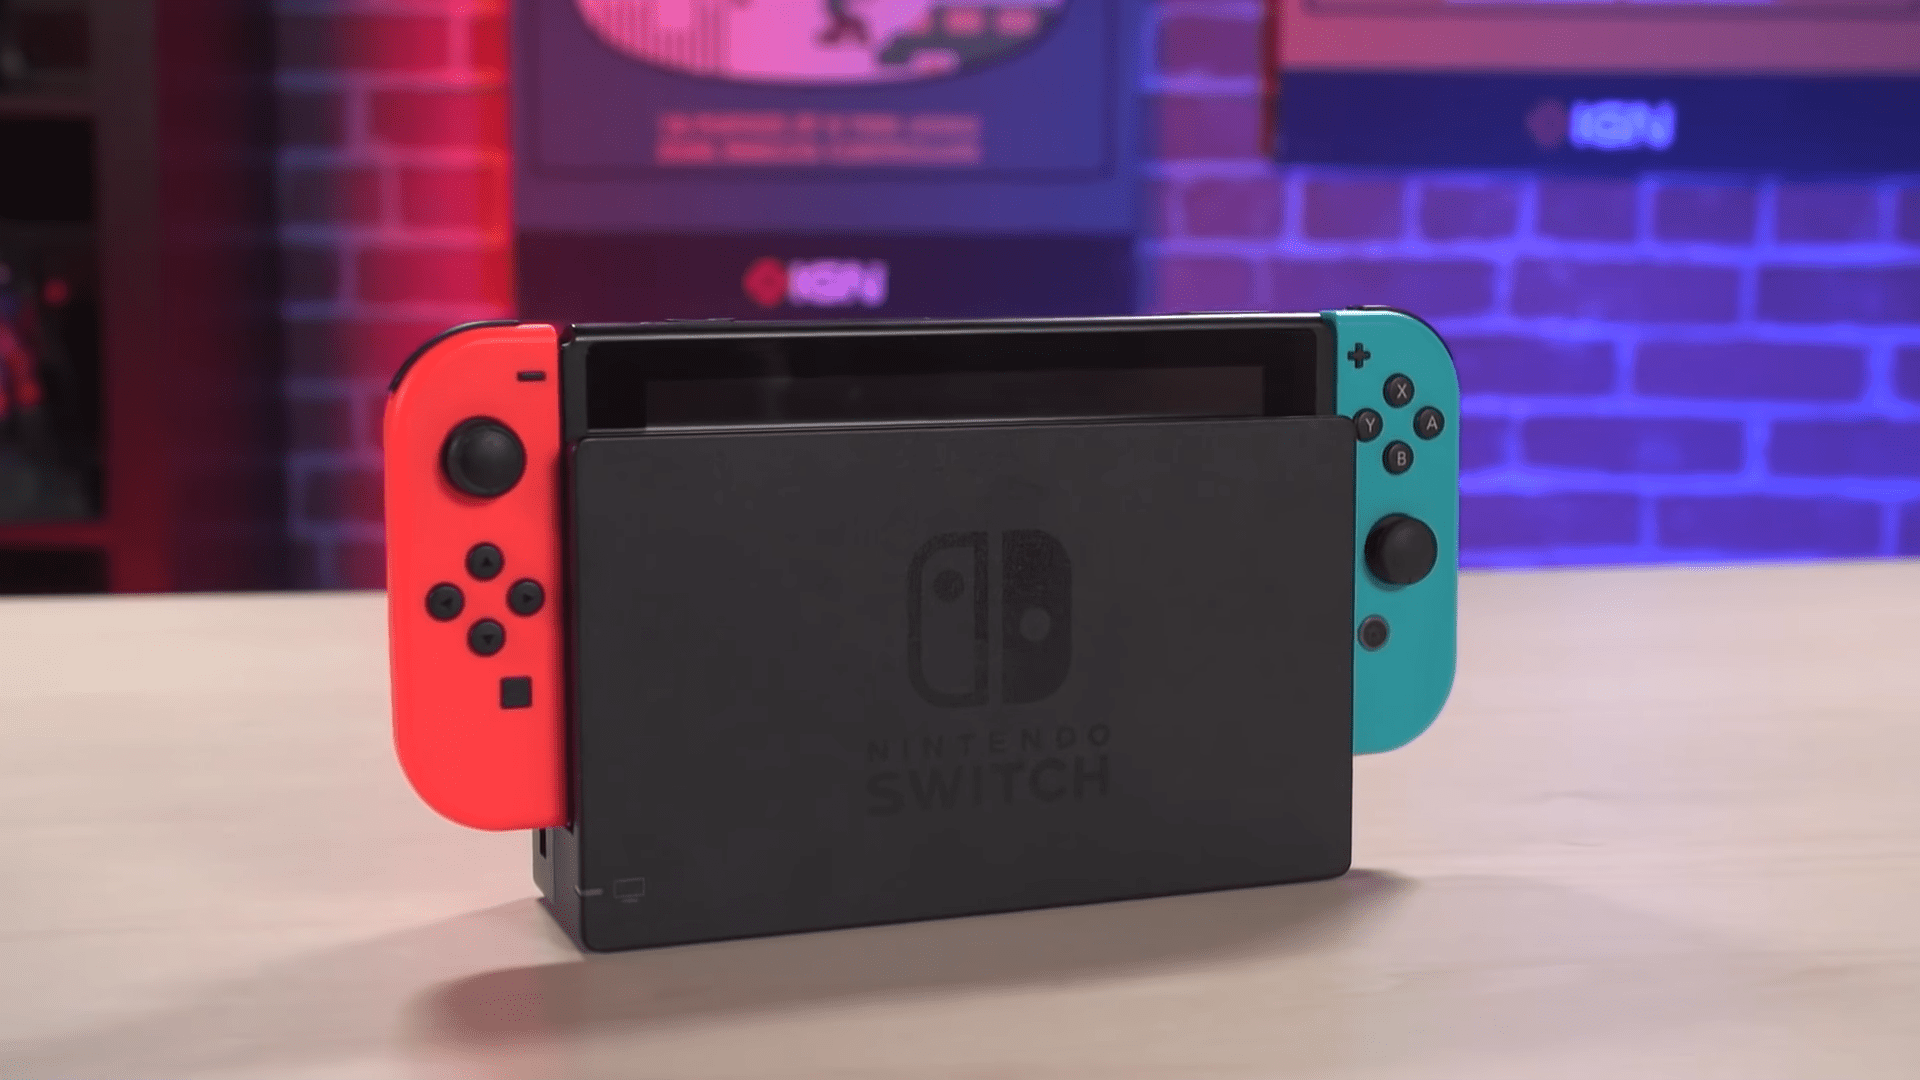 French Publication 60 Millions Consumers Named The Nintendo Switch As Too Fragile